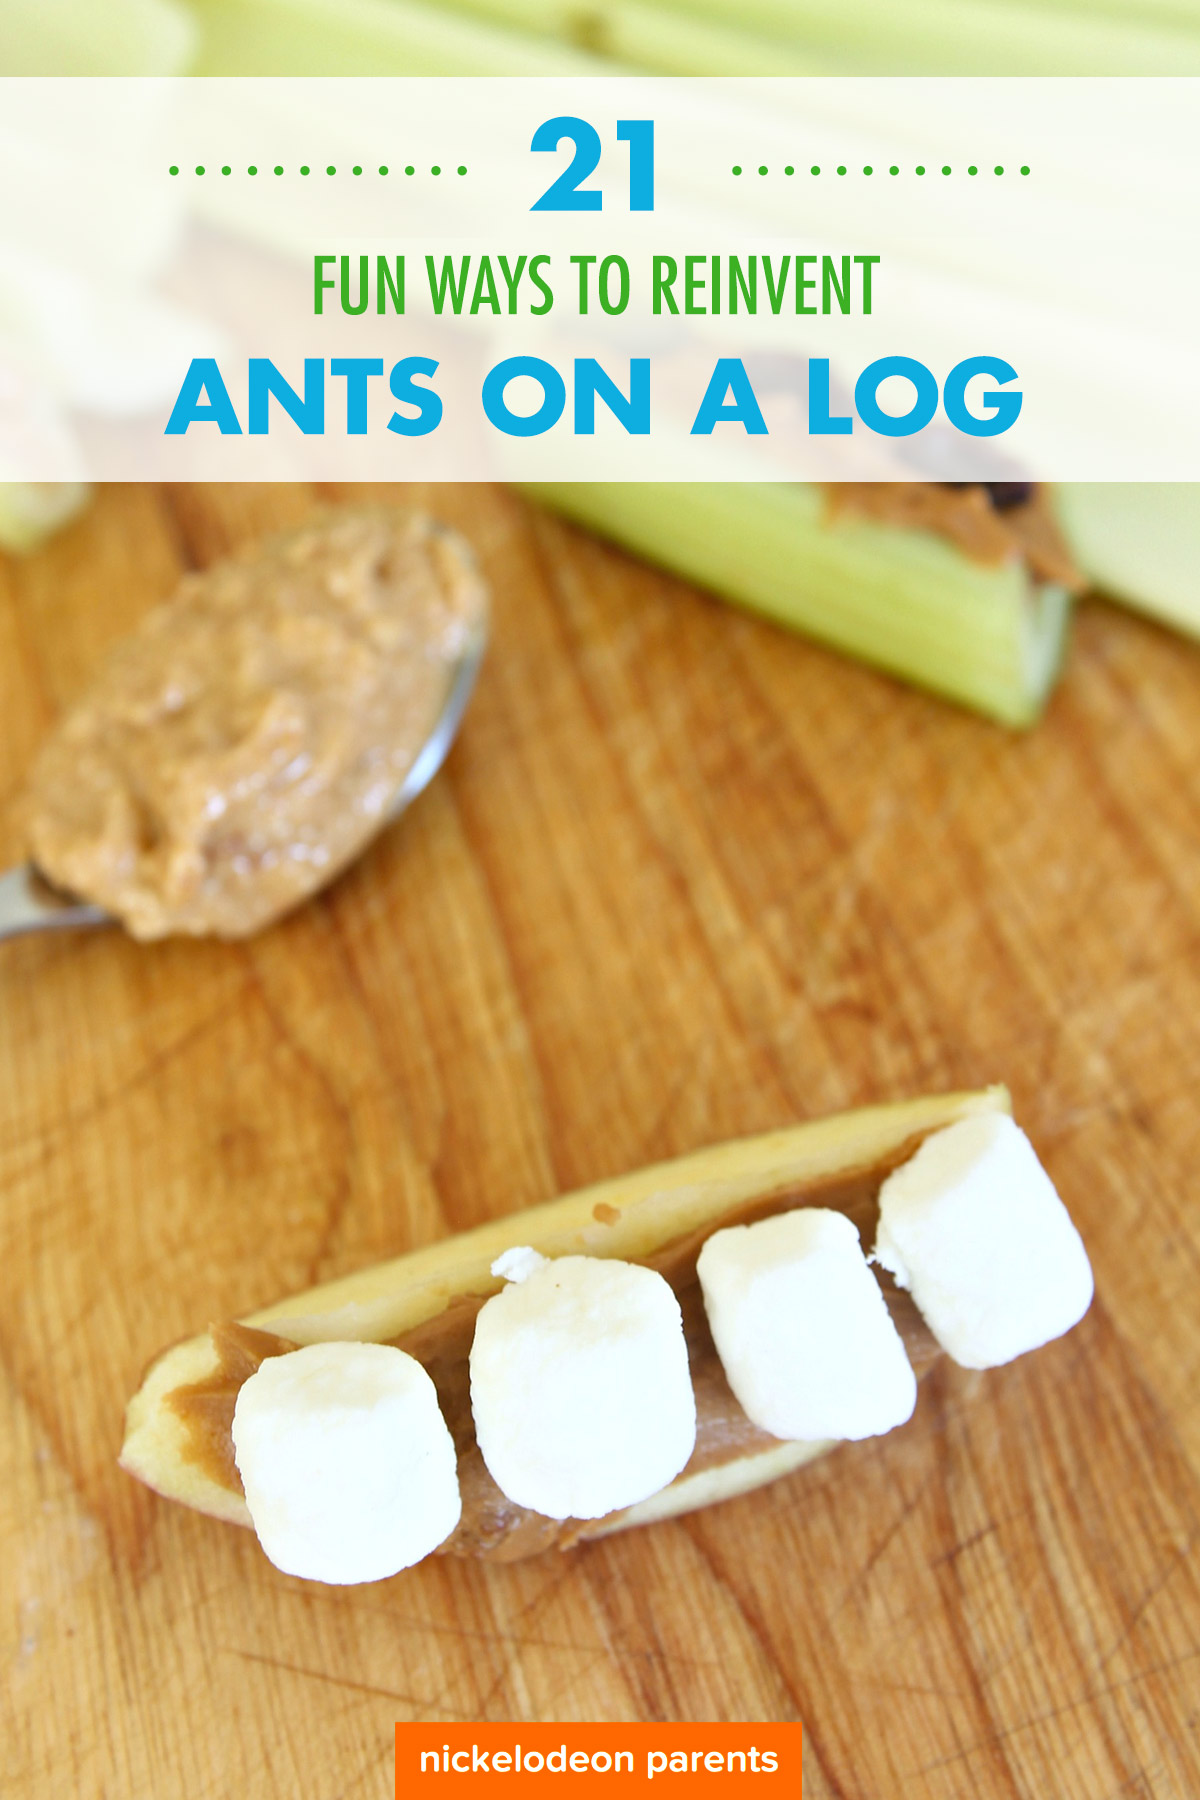 21 Ways to Reinvent "Ants on a Log"